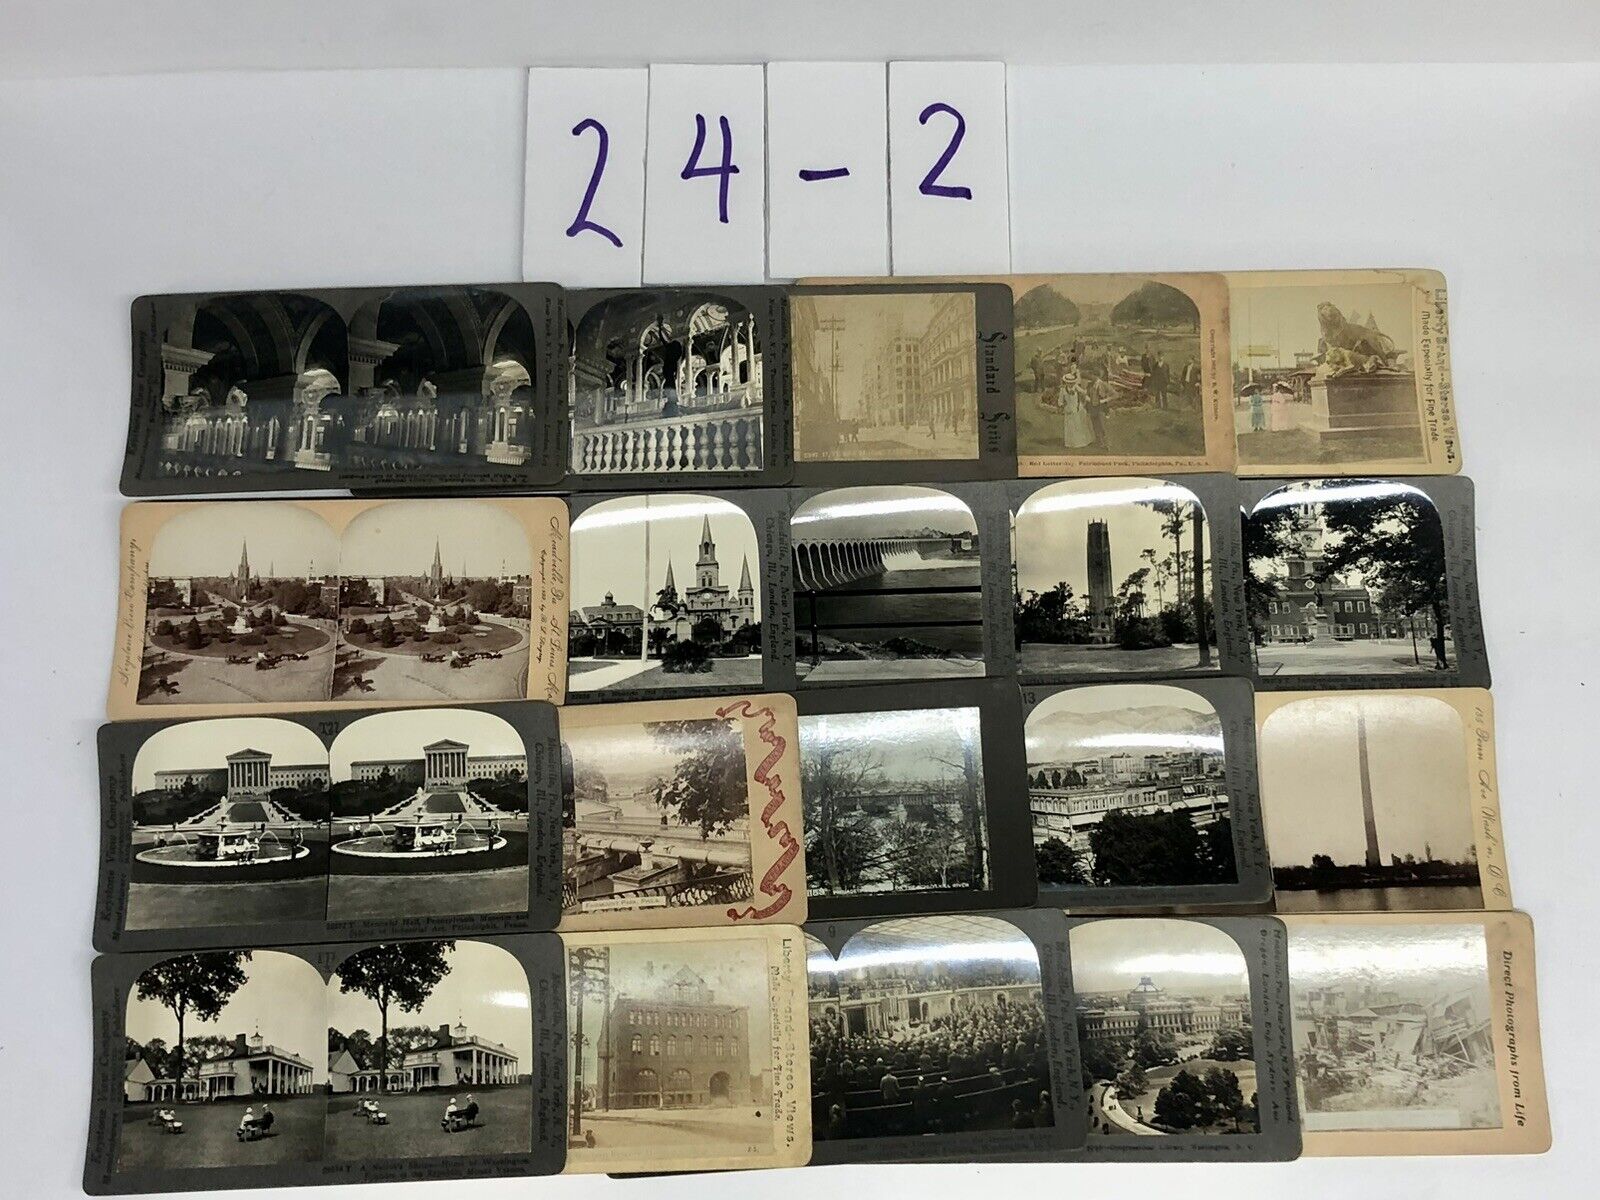 SVG24-2  Mixed Lot of 20 Stereoviews United States Cities, Places